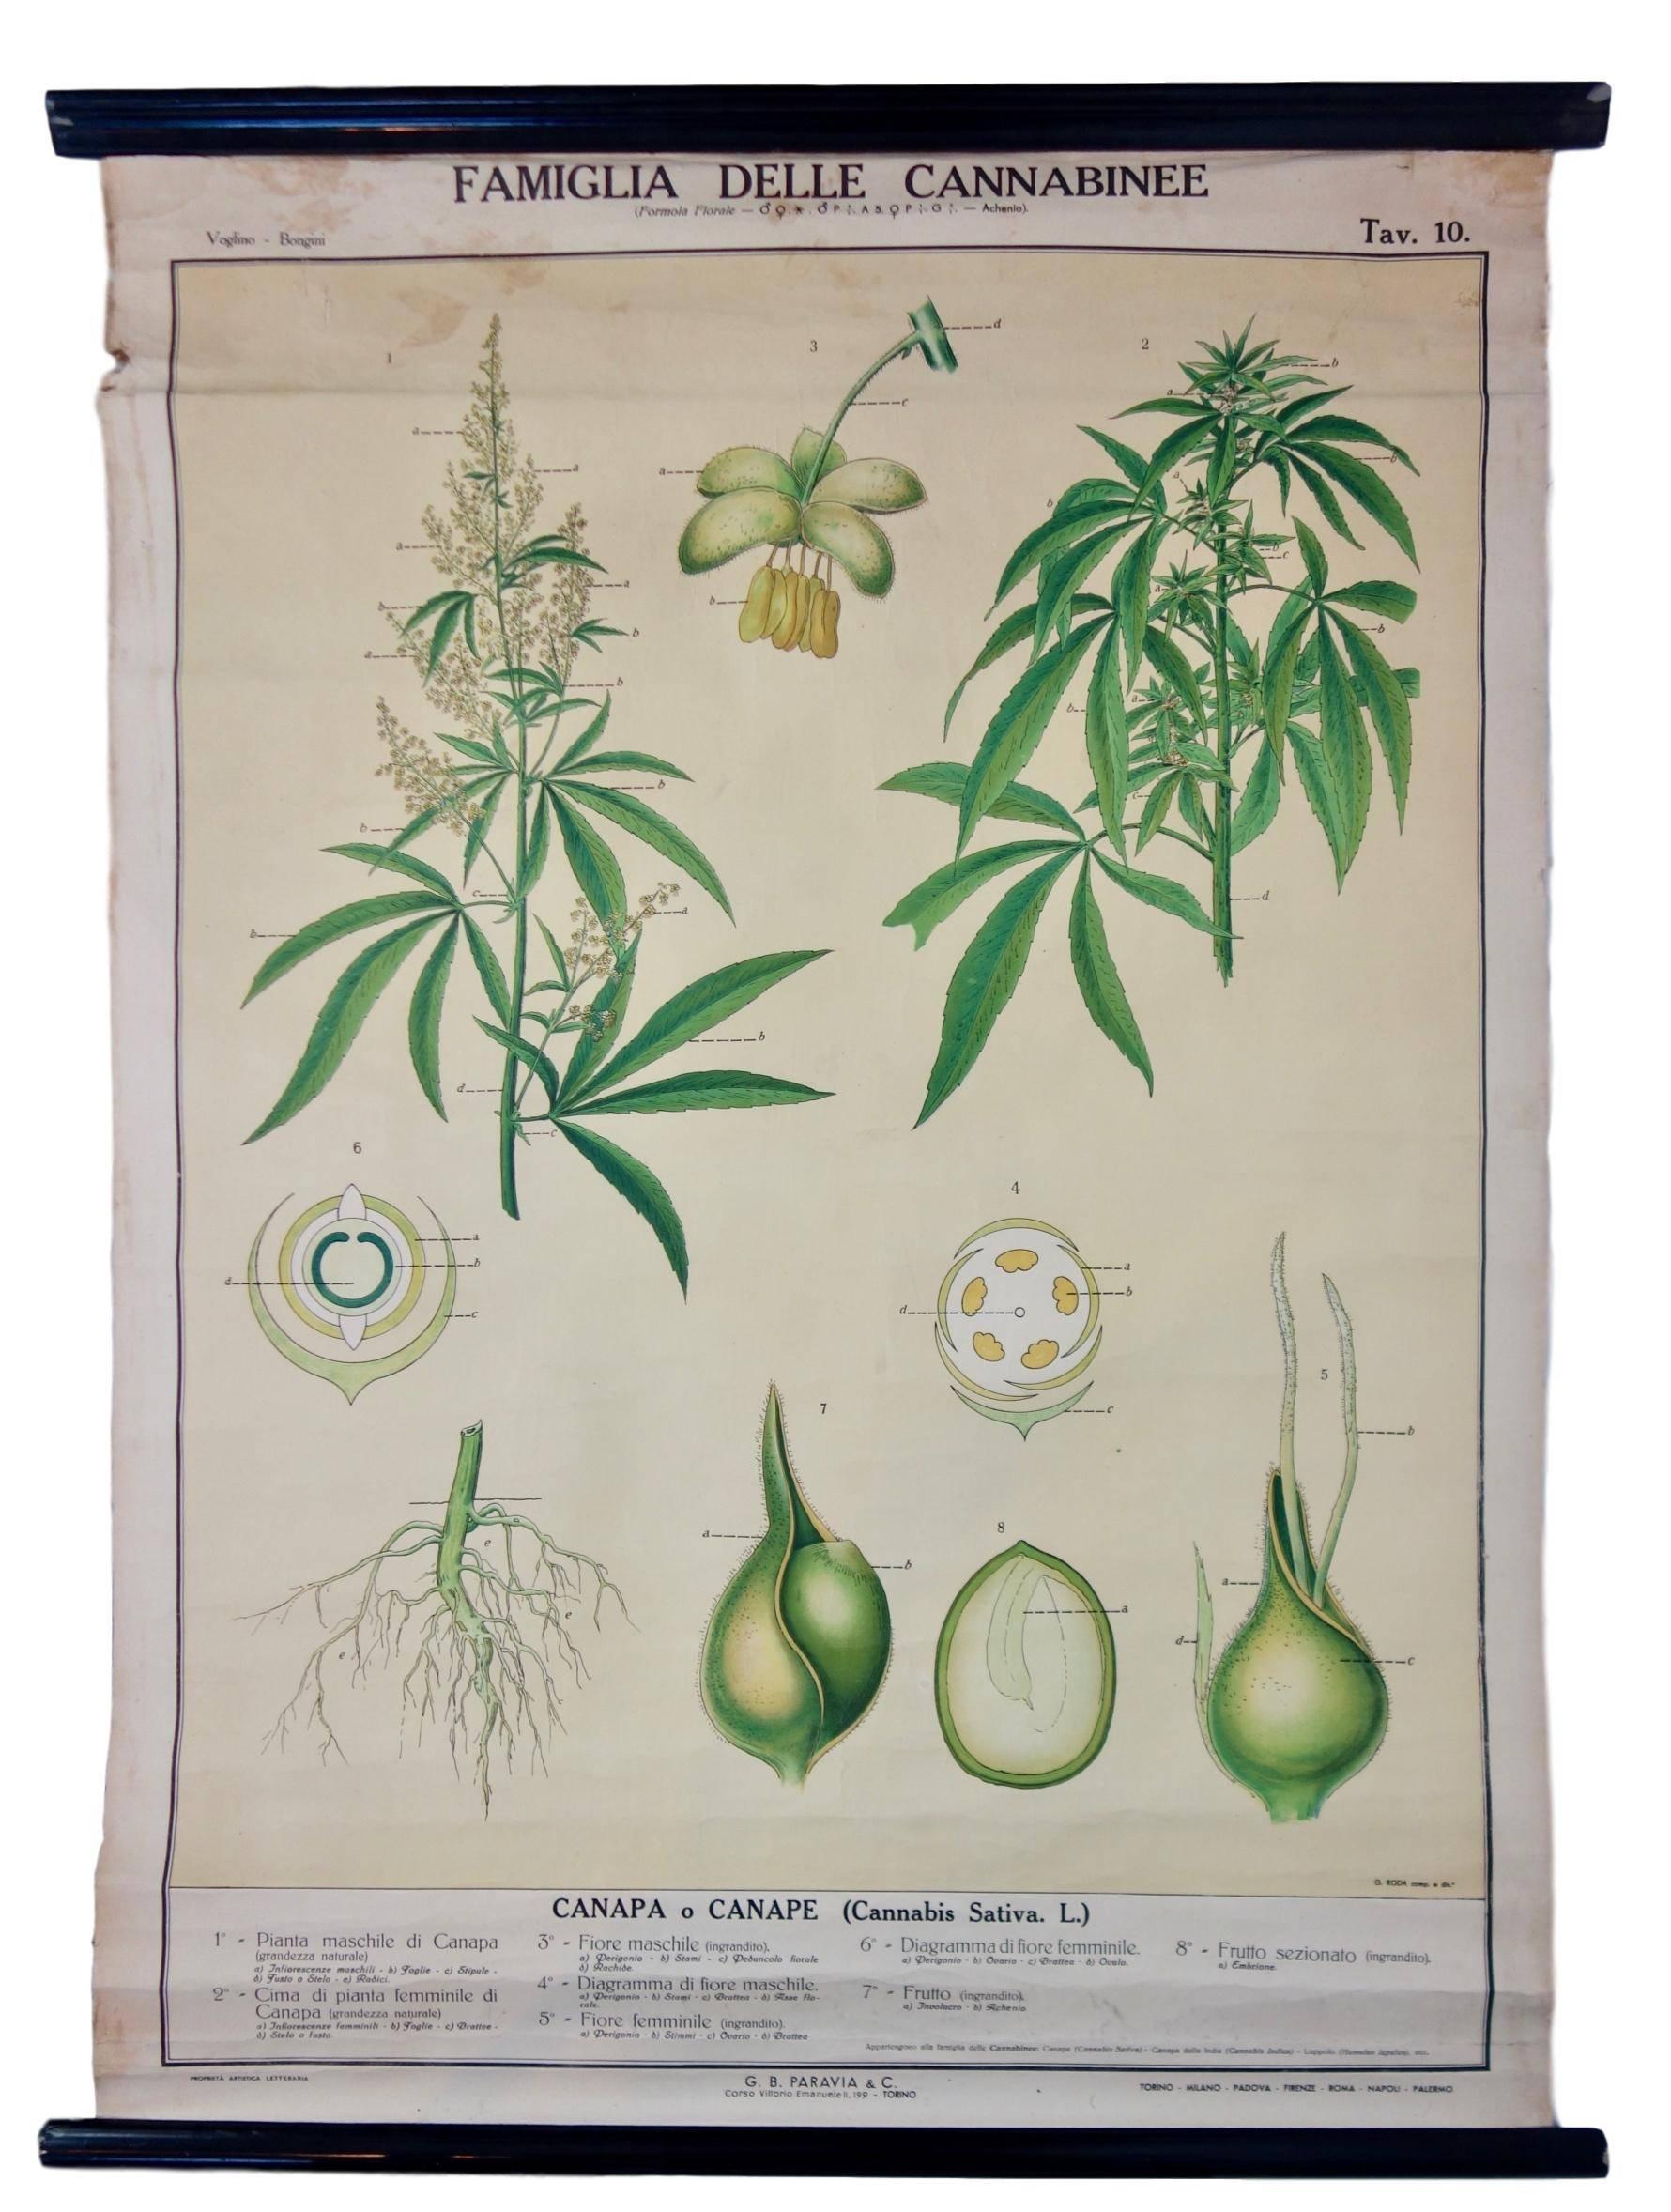 This is a vintage Italian botanical cannabis educational poster “Famiglia Delle Cannabinee” from Turin, Italy.